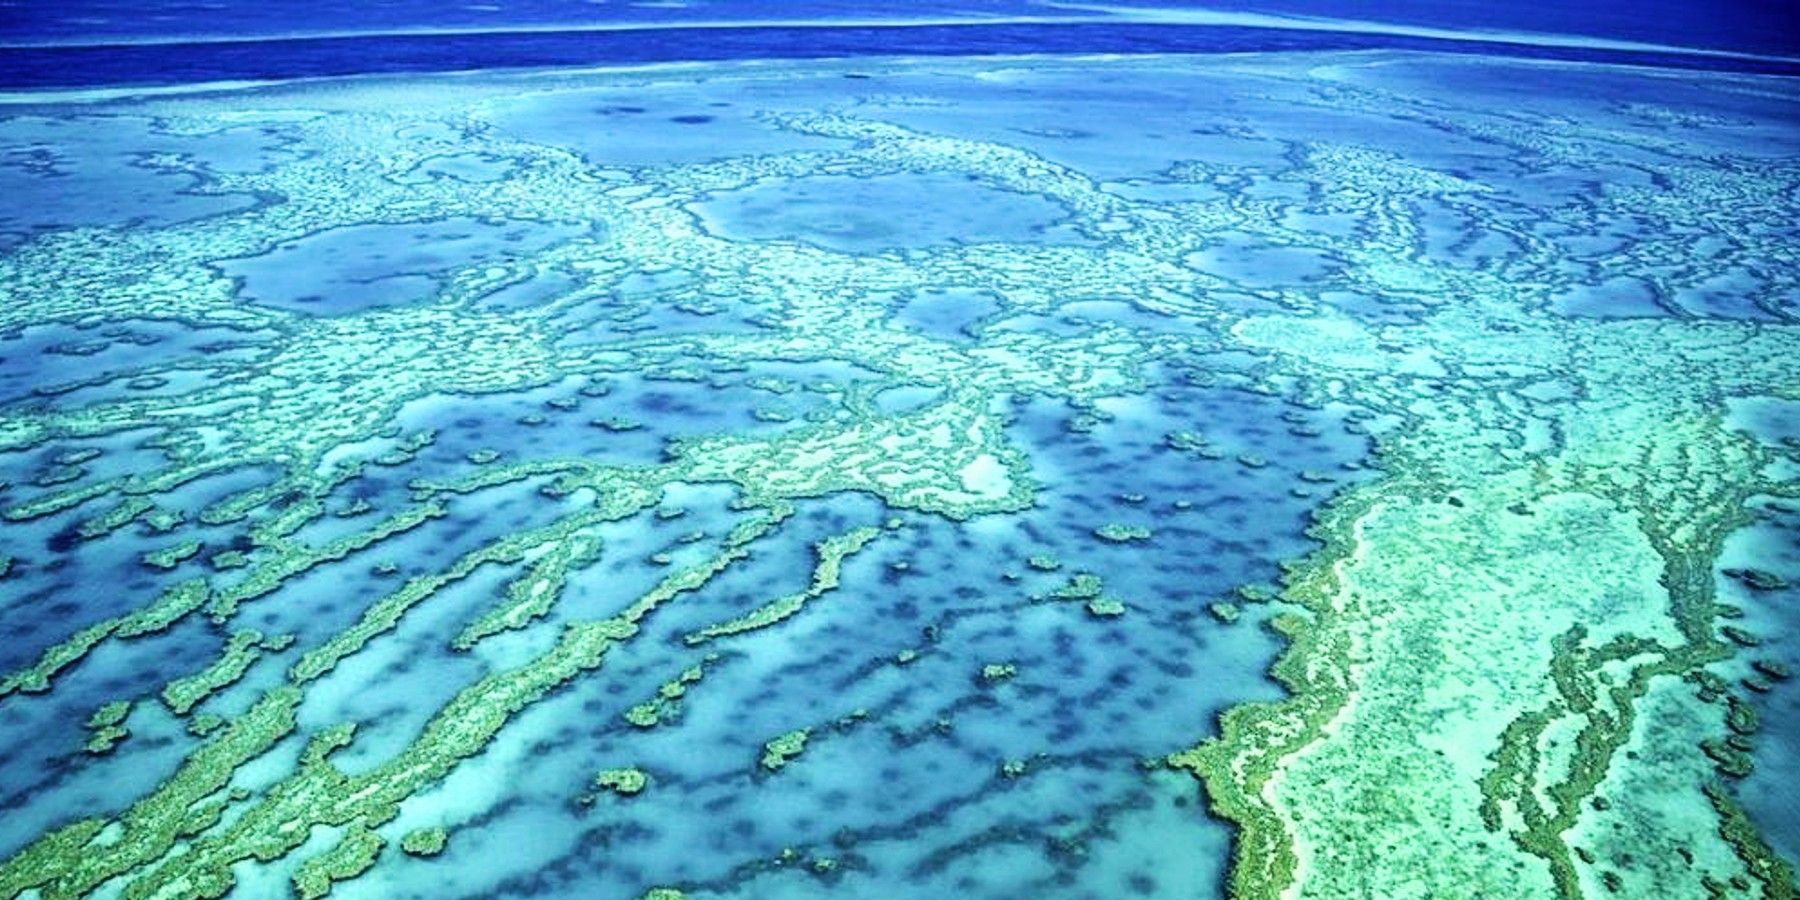 NASA Satellite Image Of Great Coral Barrier.